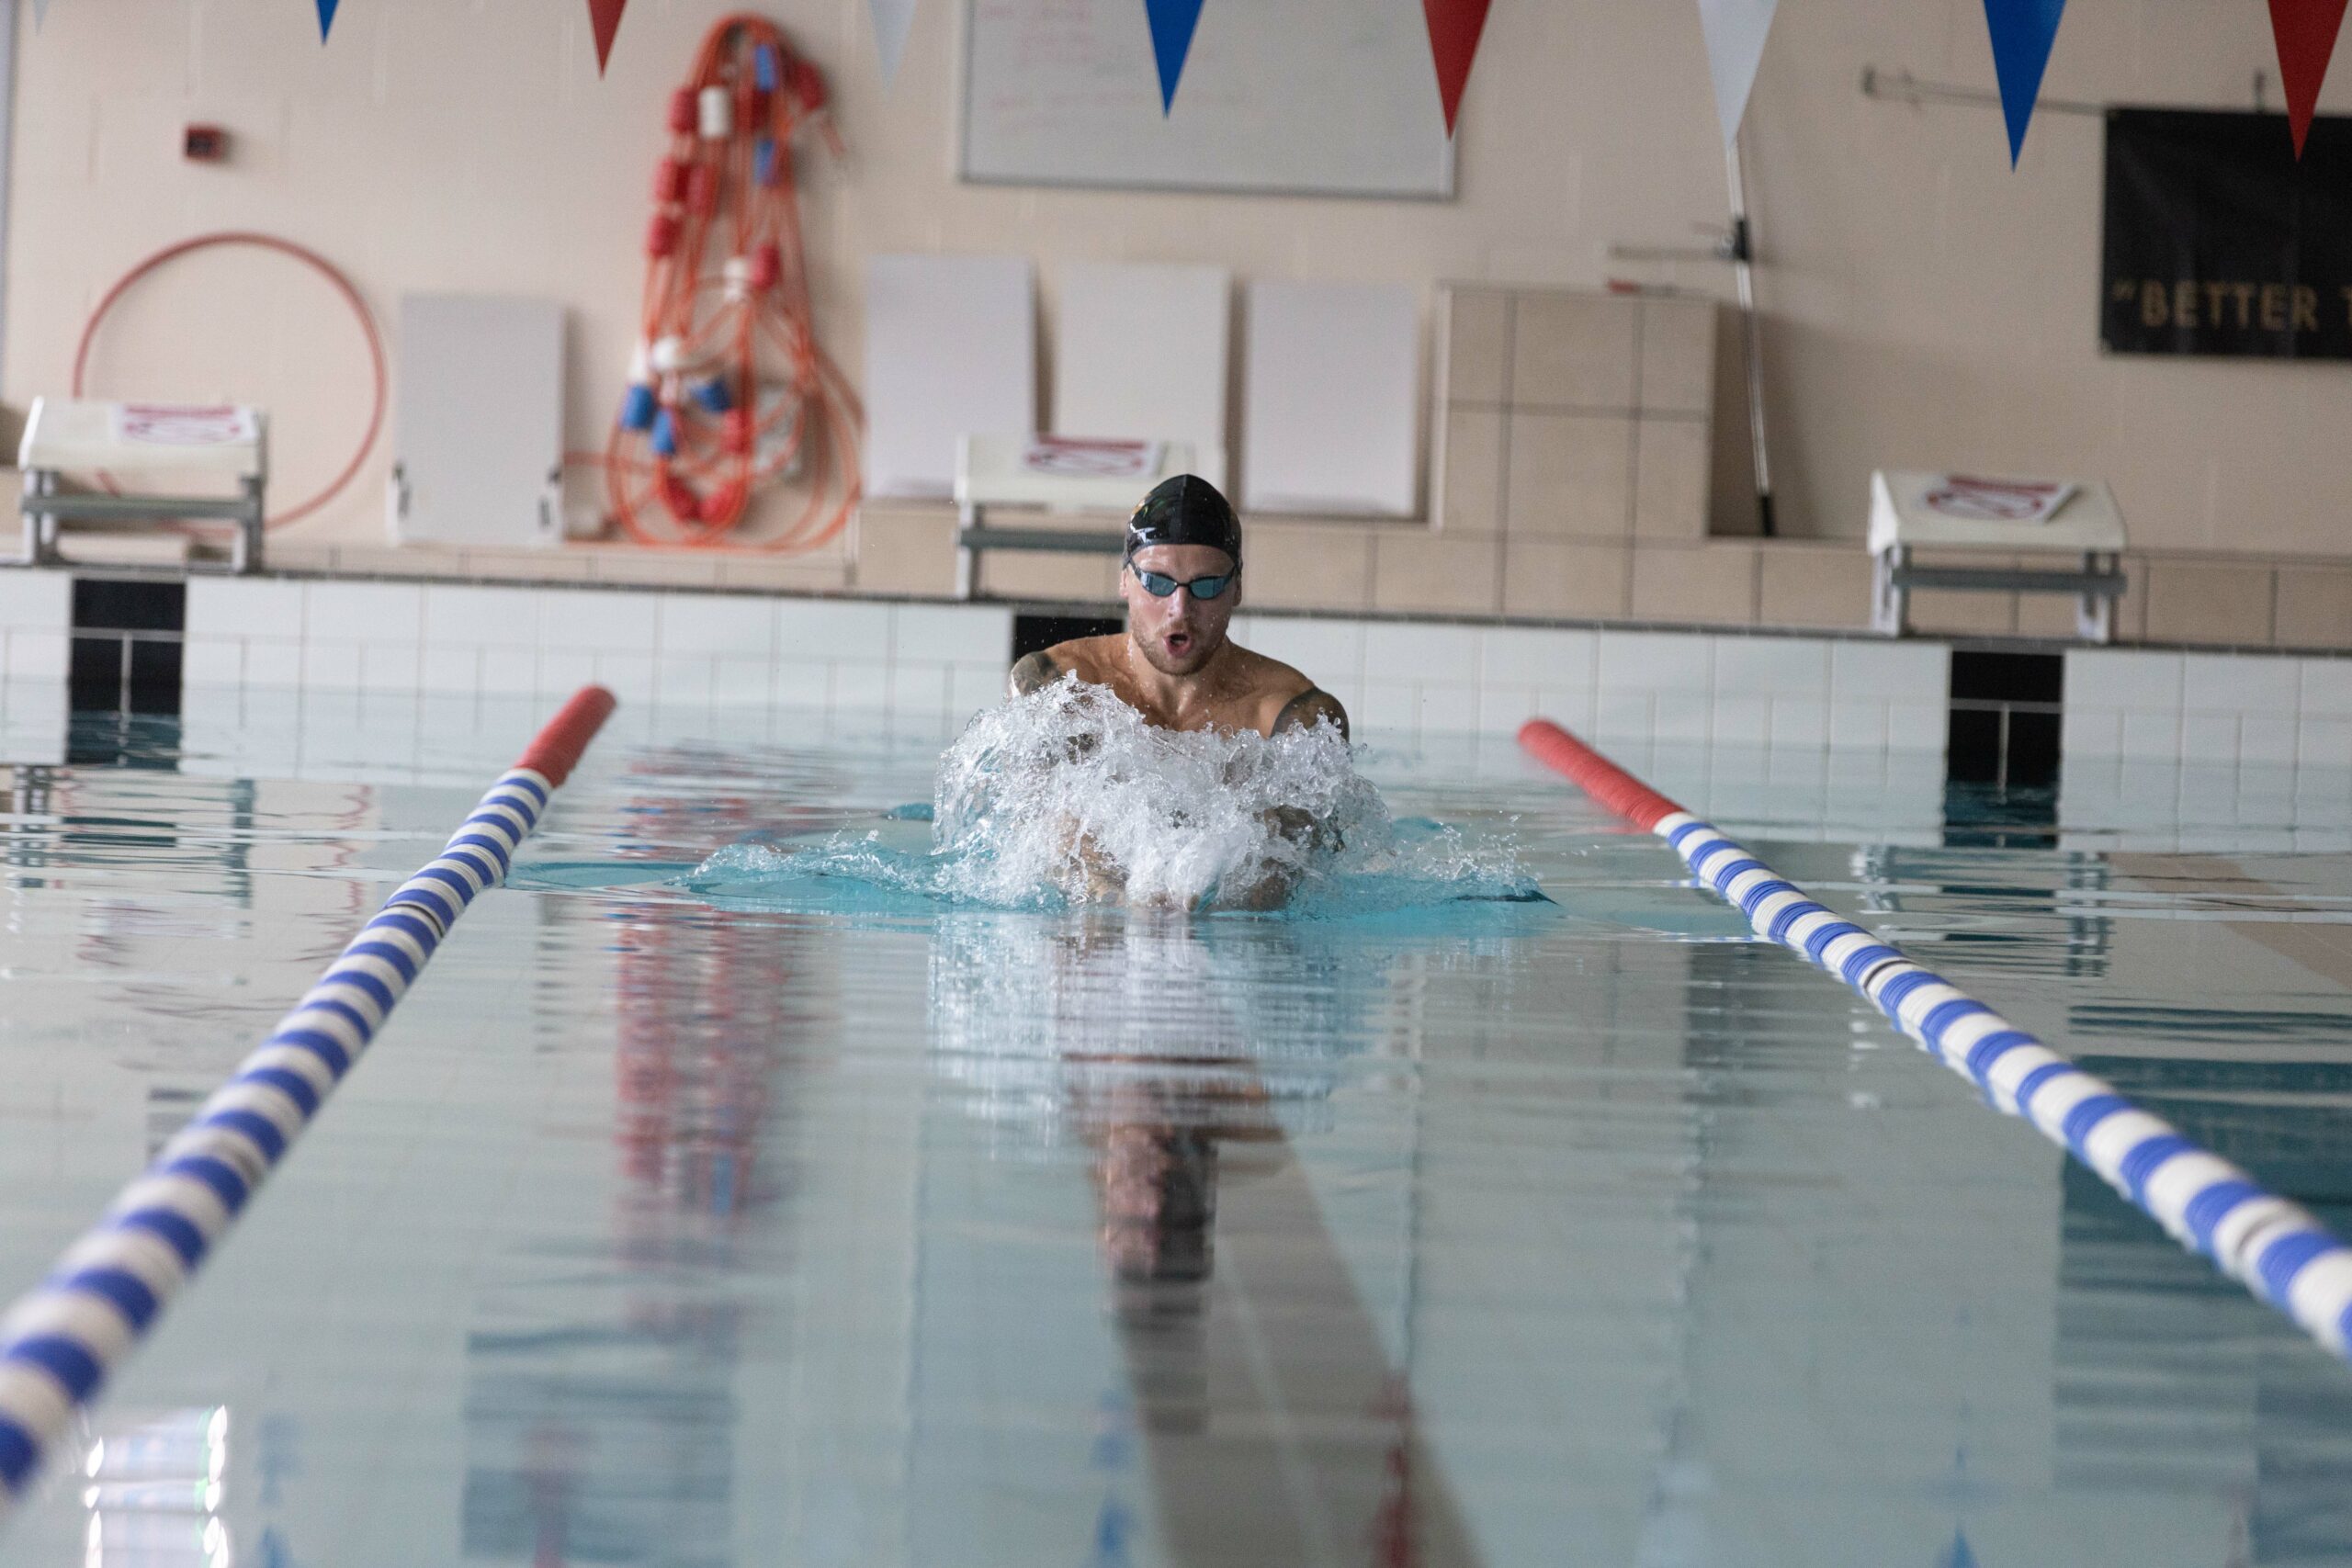 Adam Peaty Race Clinic goes the extra length for the community